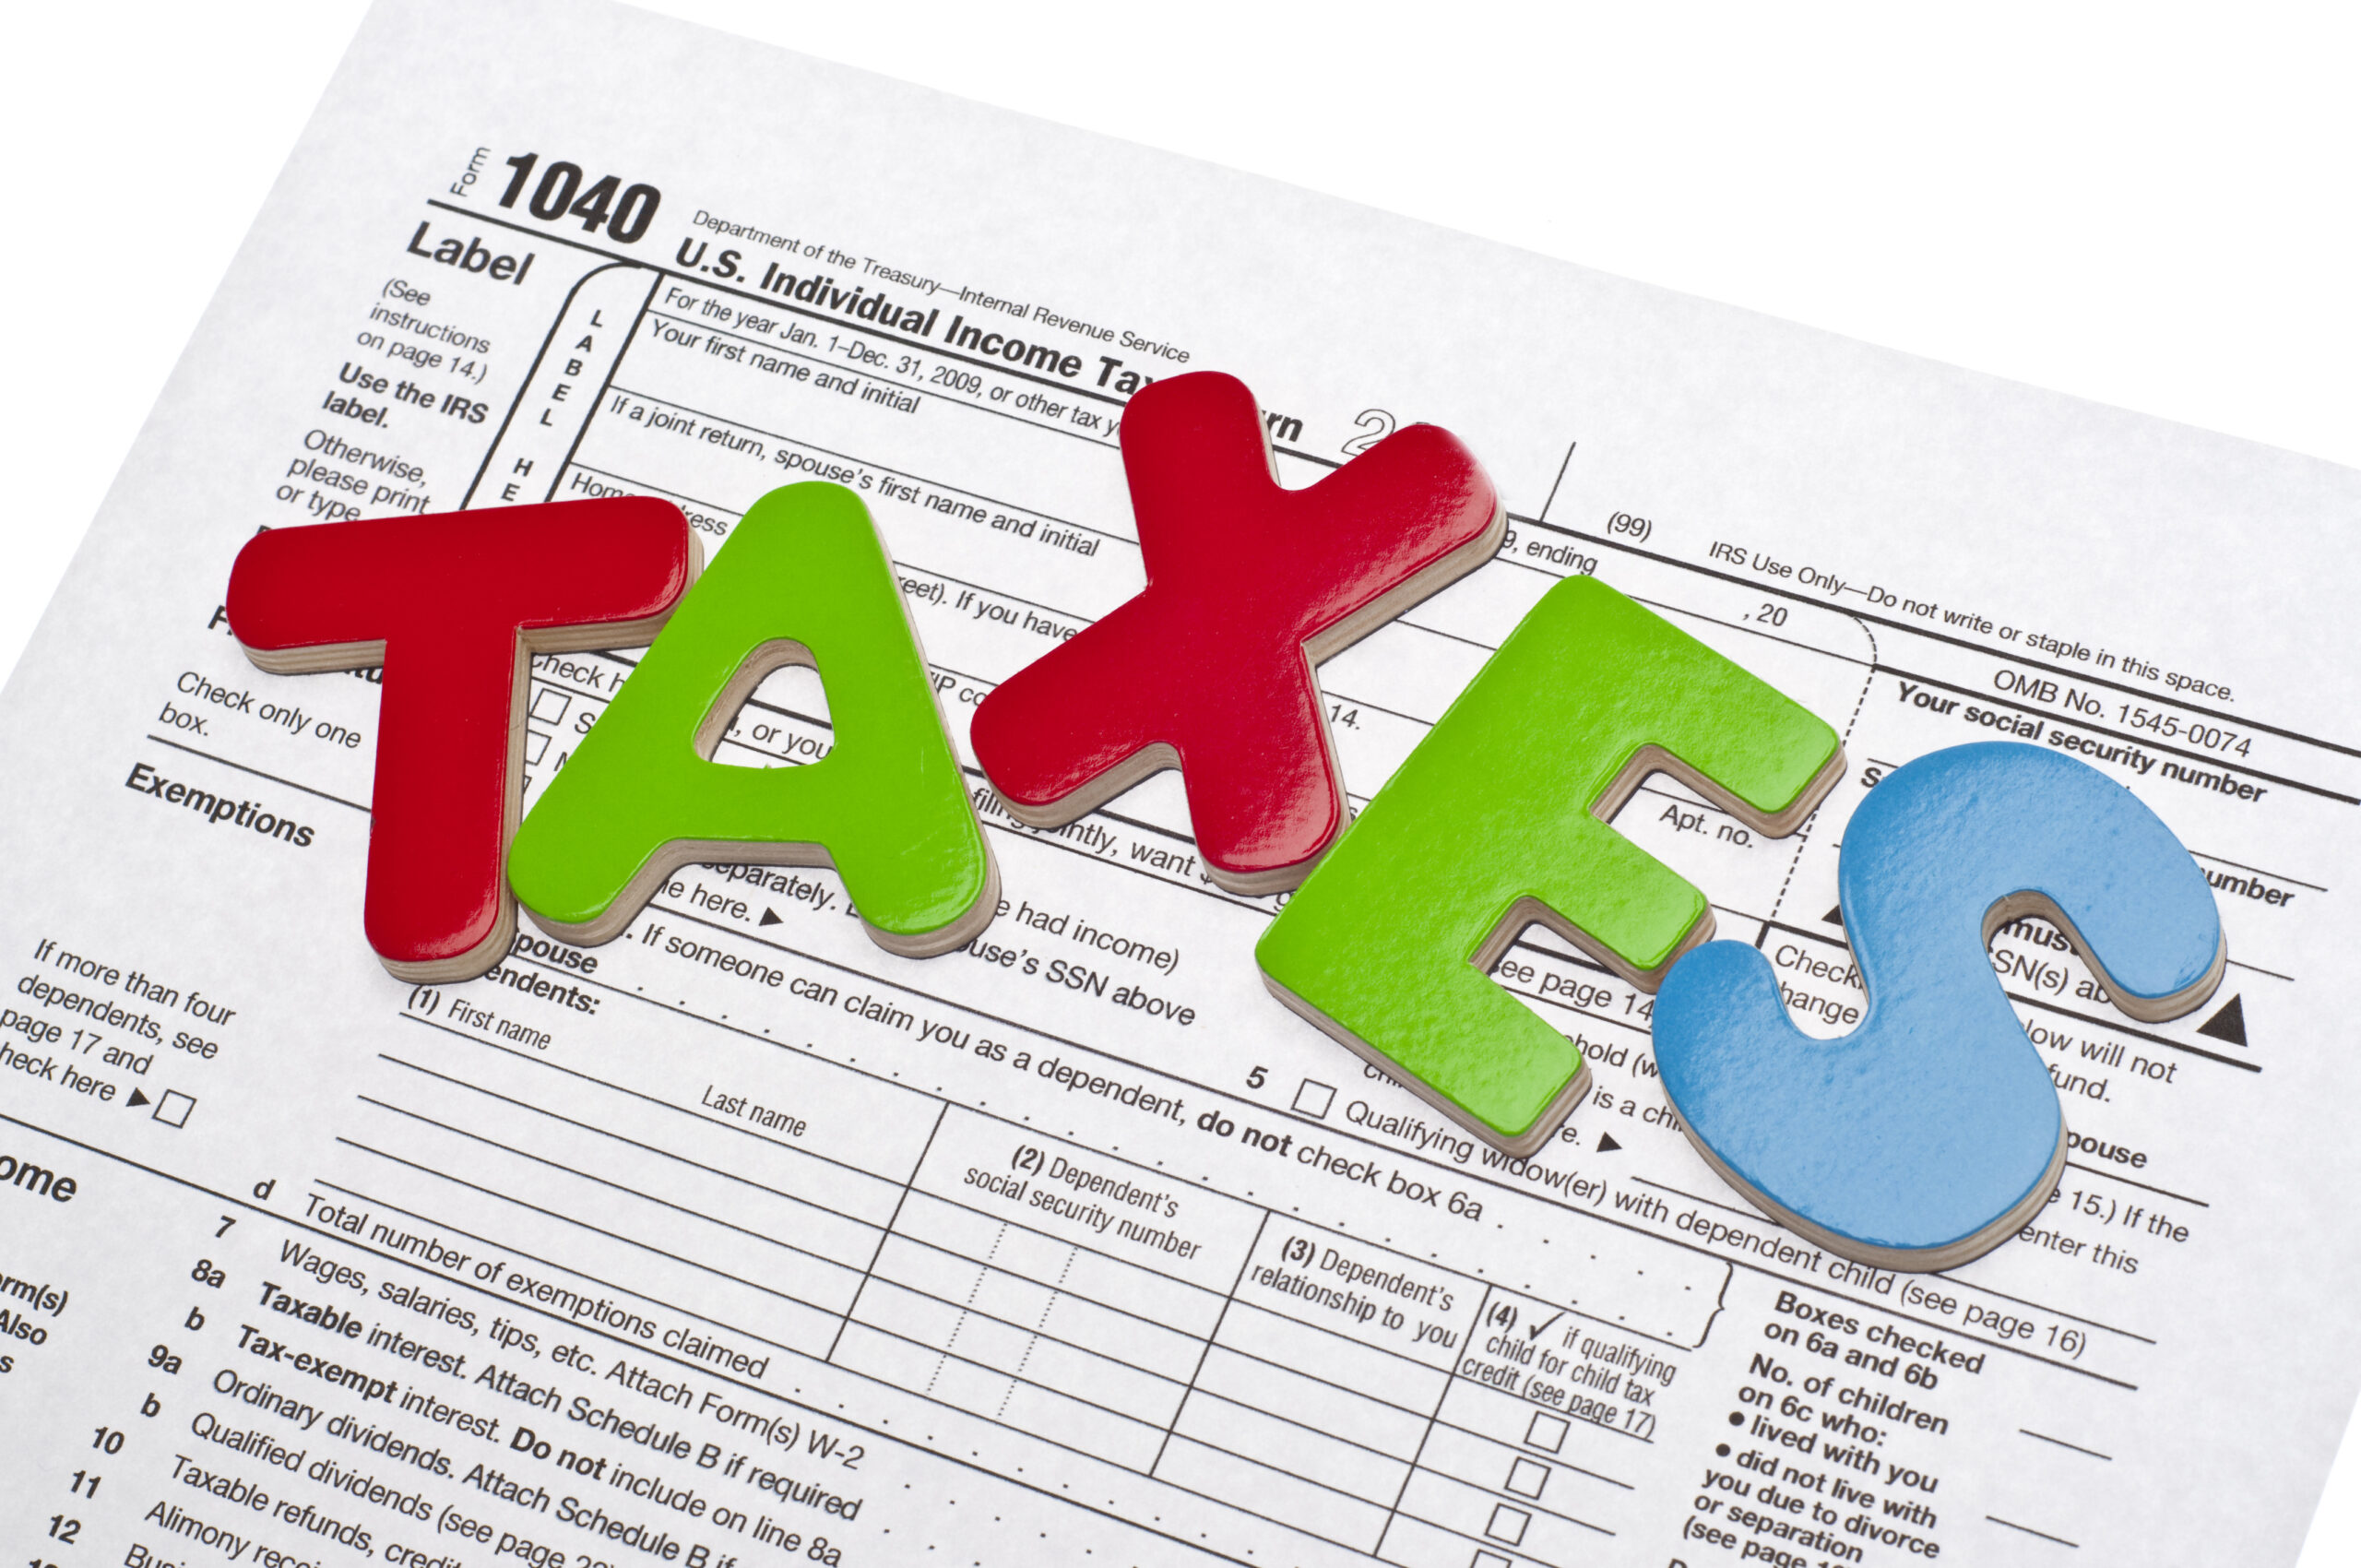 Don't panic as tax time looms; use these tips to organize tax documents now and throughout the year!